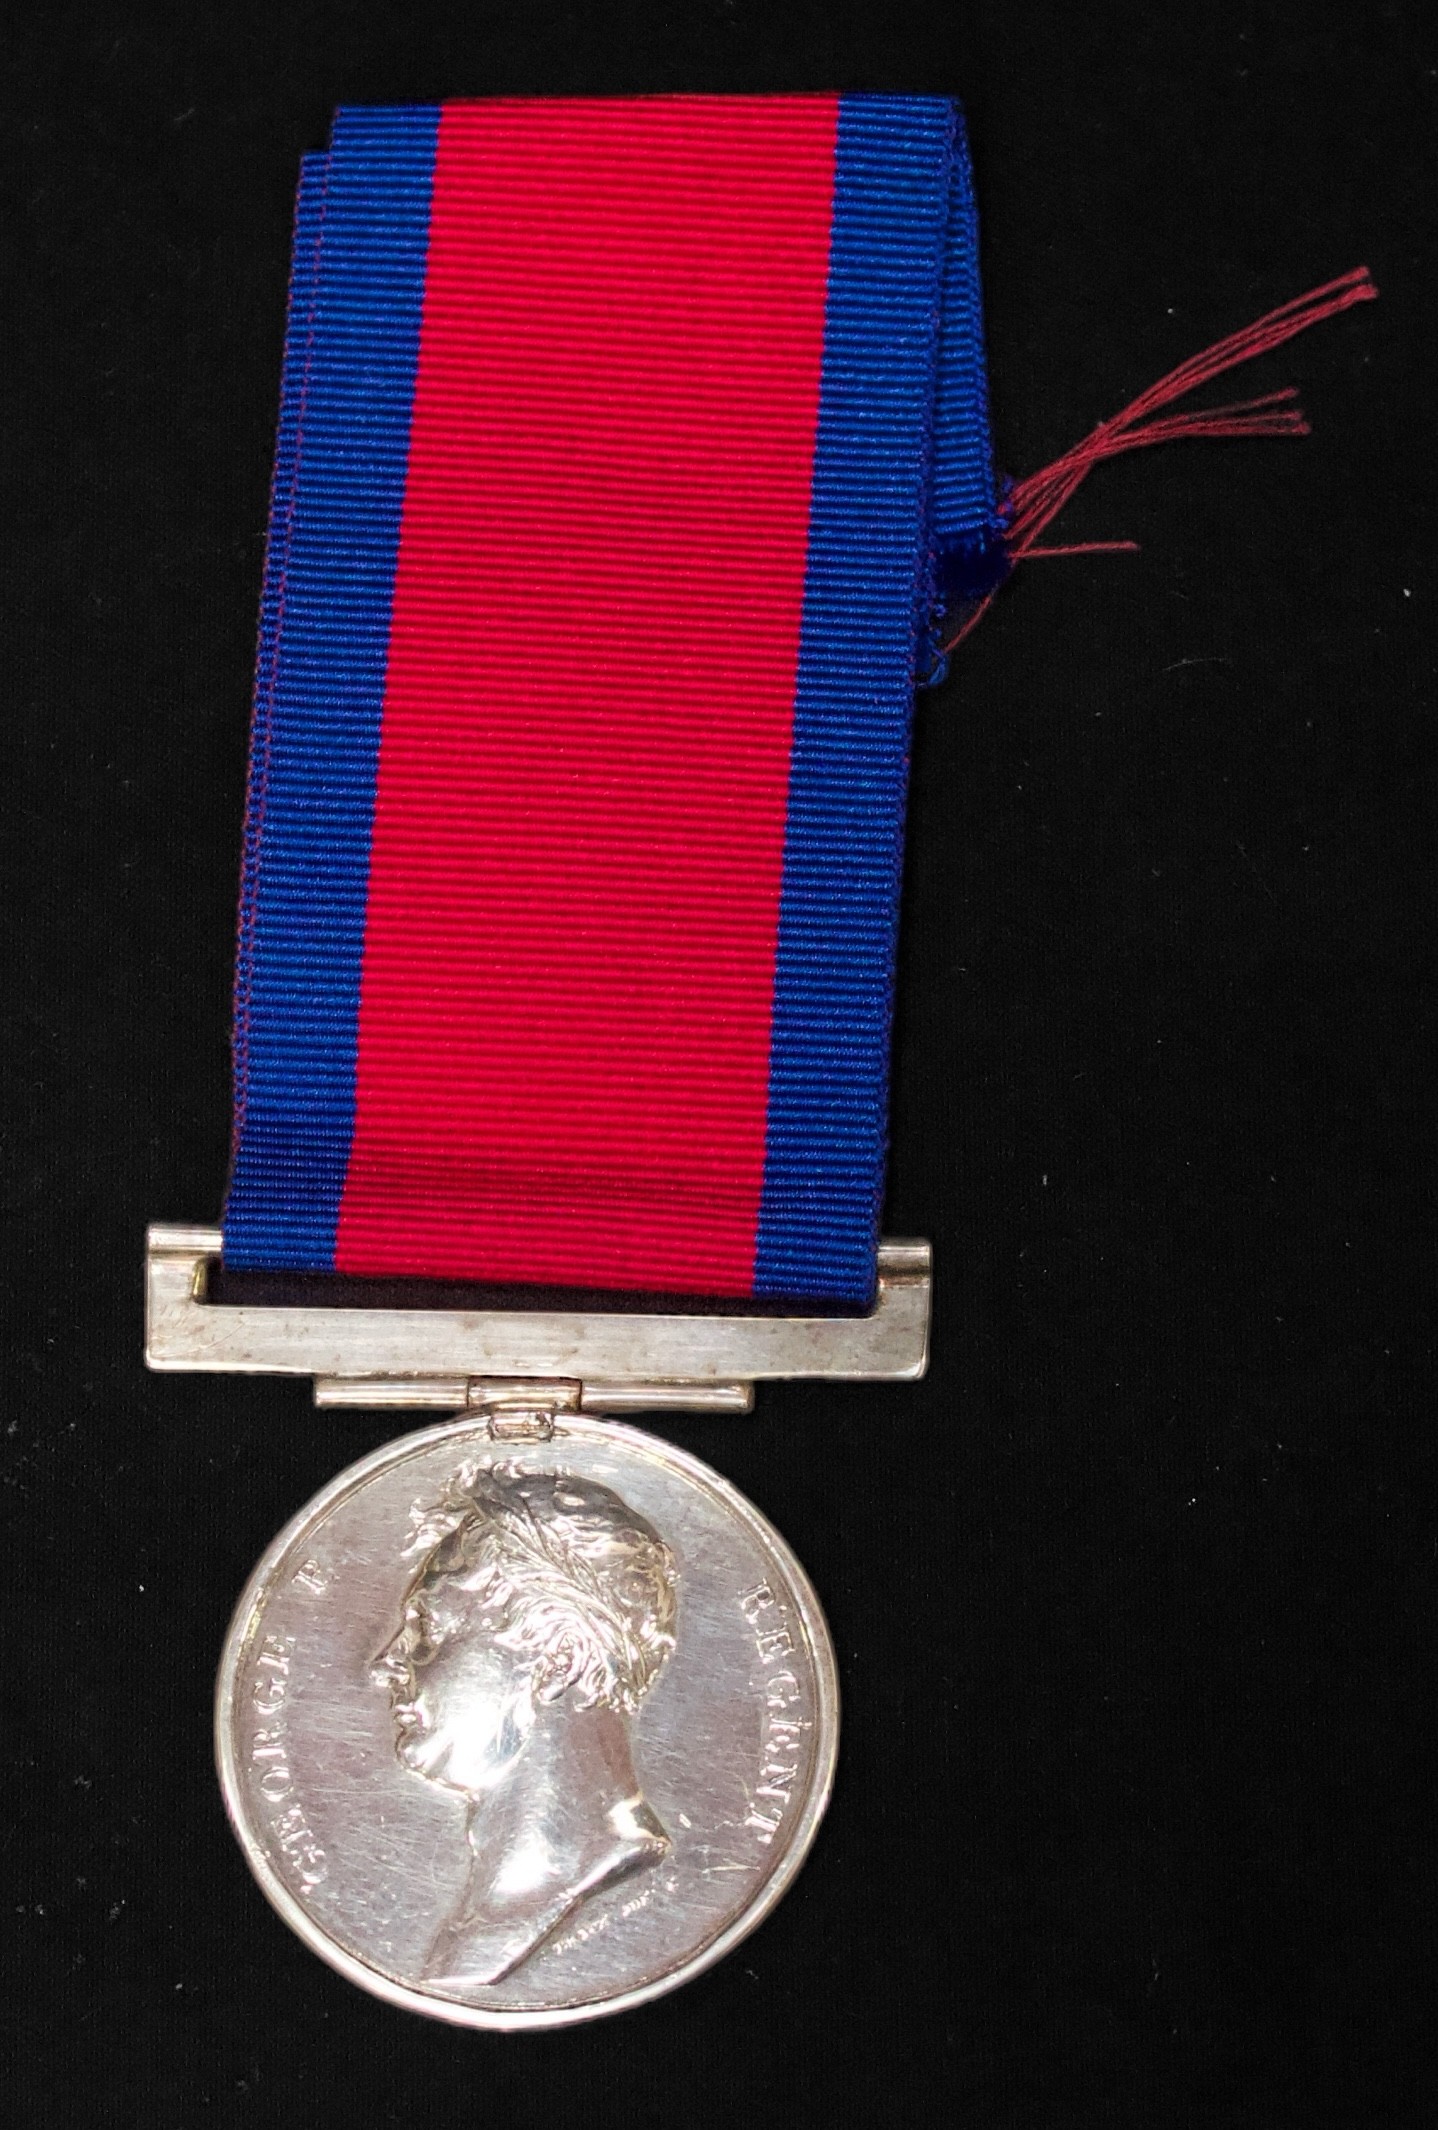 A Waterloo Medal 1815 to William Aberfield 2nd Battalion 95th Regiment of Foot, together with A3